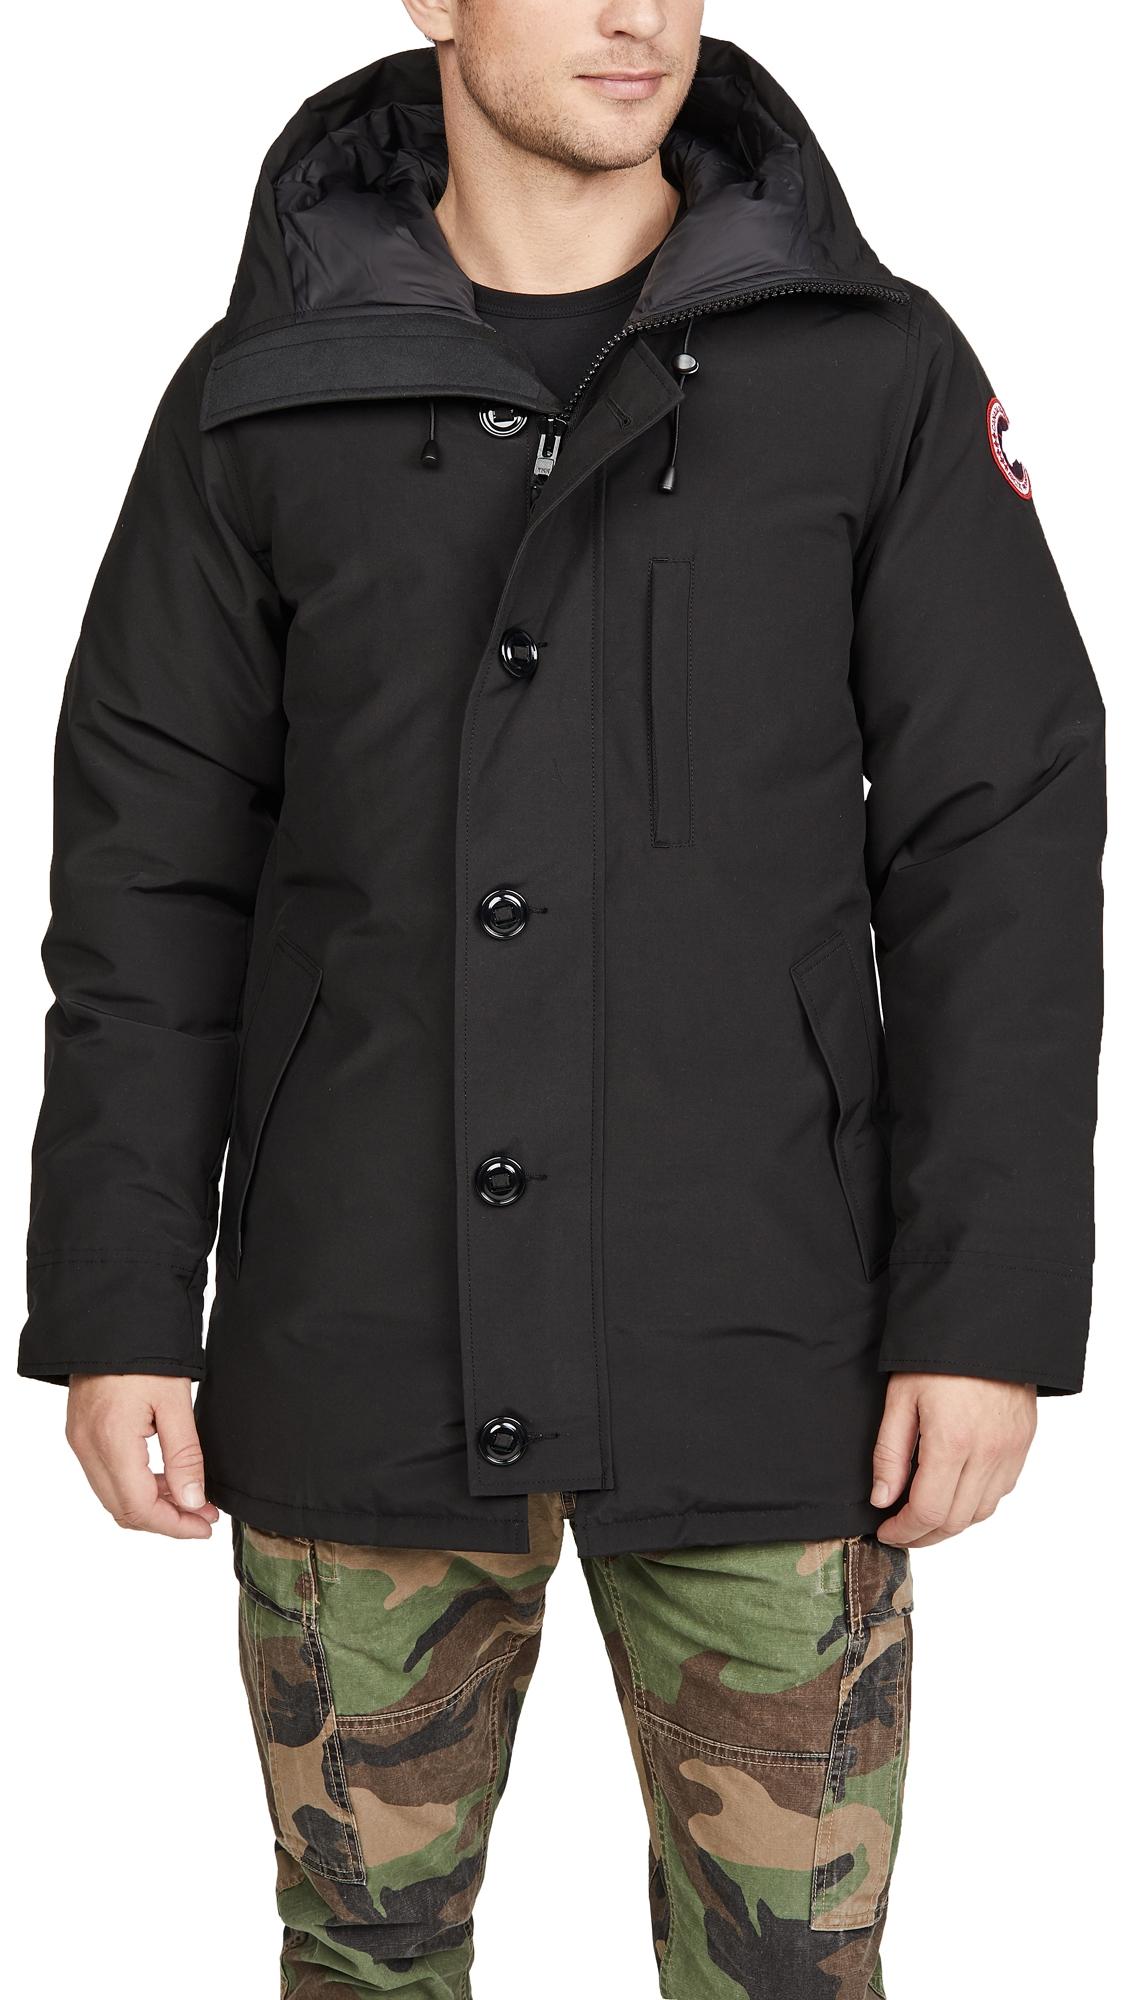 Canada Goose Synthetic Chateau Parka Non-fur in Black for Men - Lyst